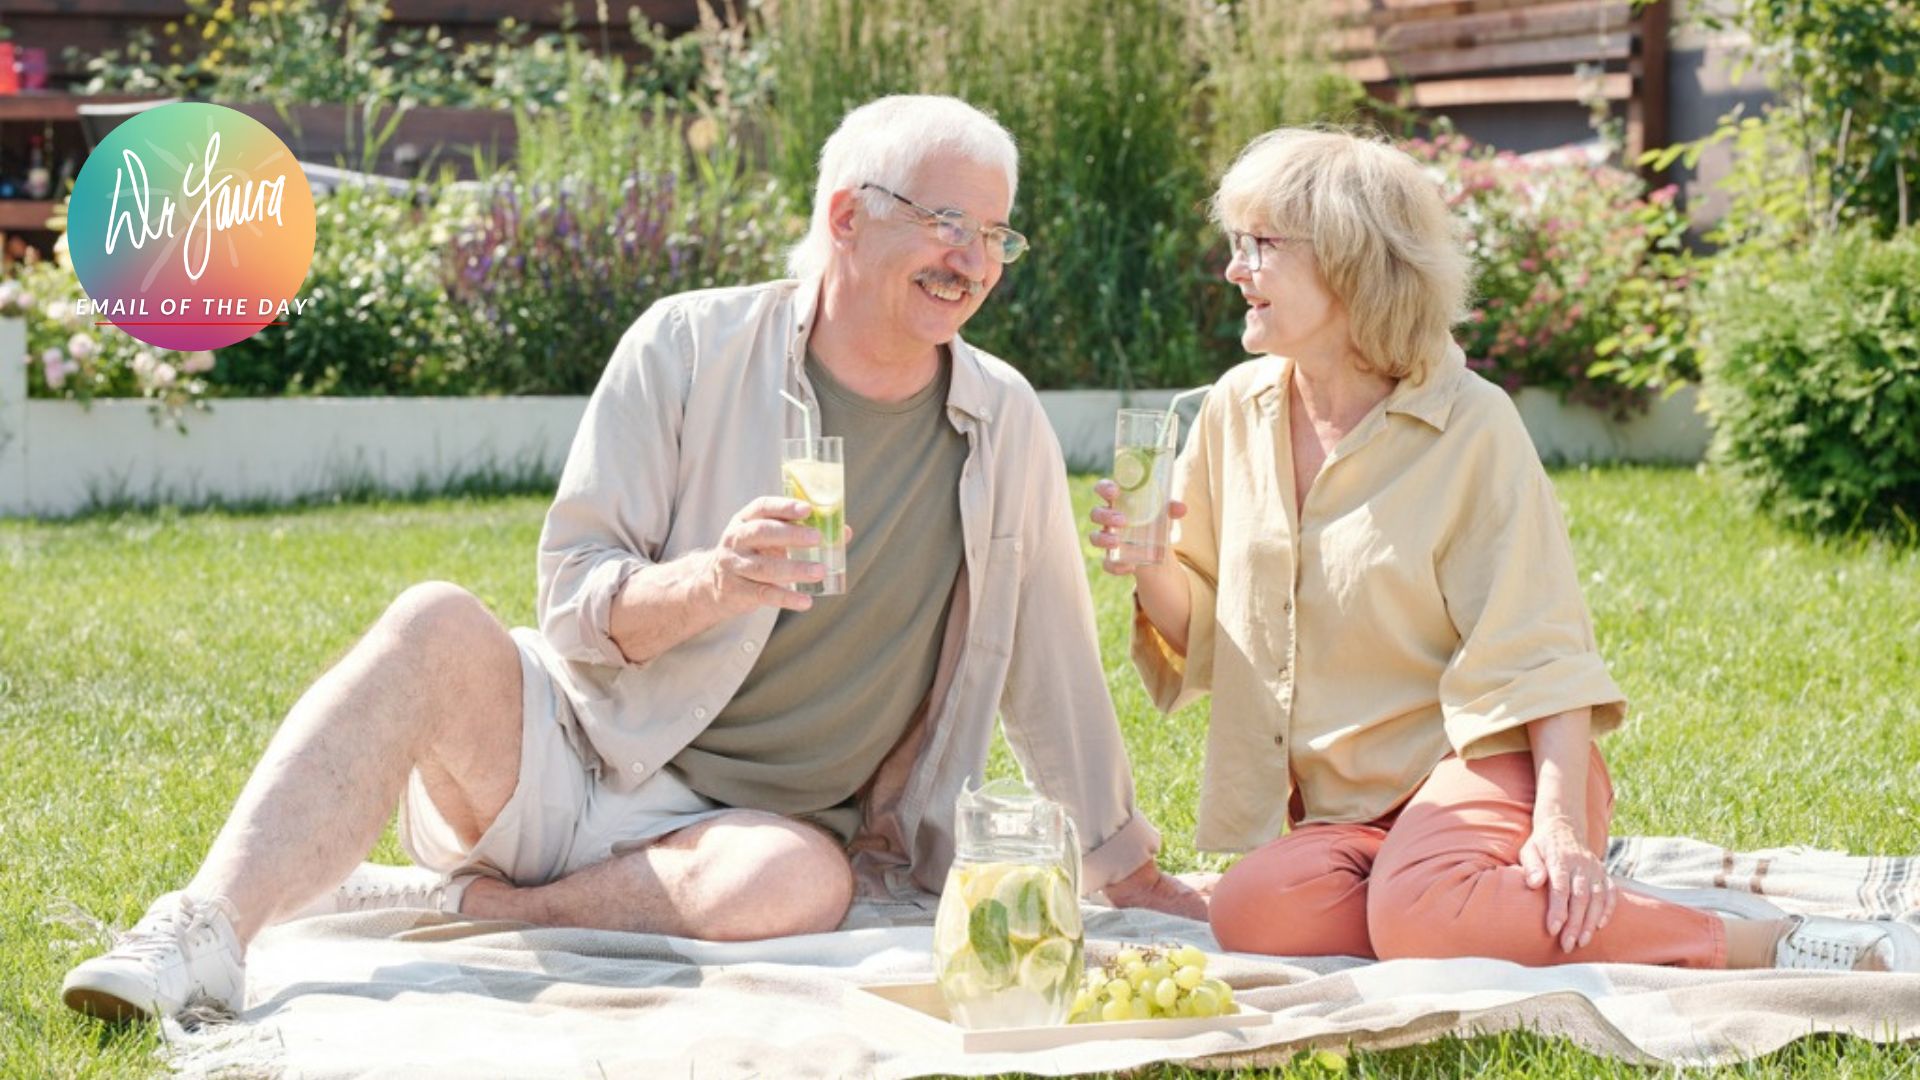 Man in green shirt sits next to woman in beige button up on a picnic blanket outside